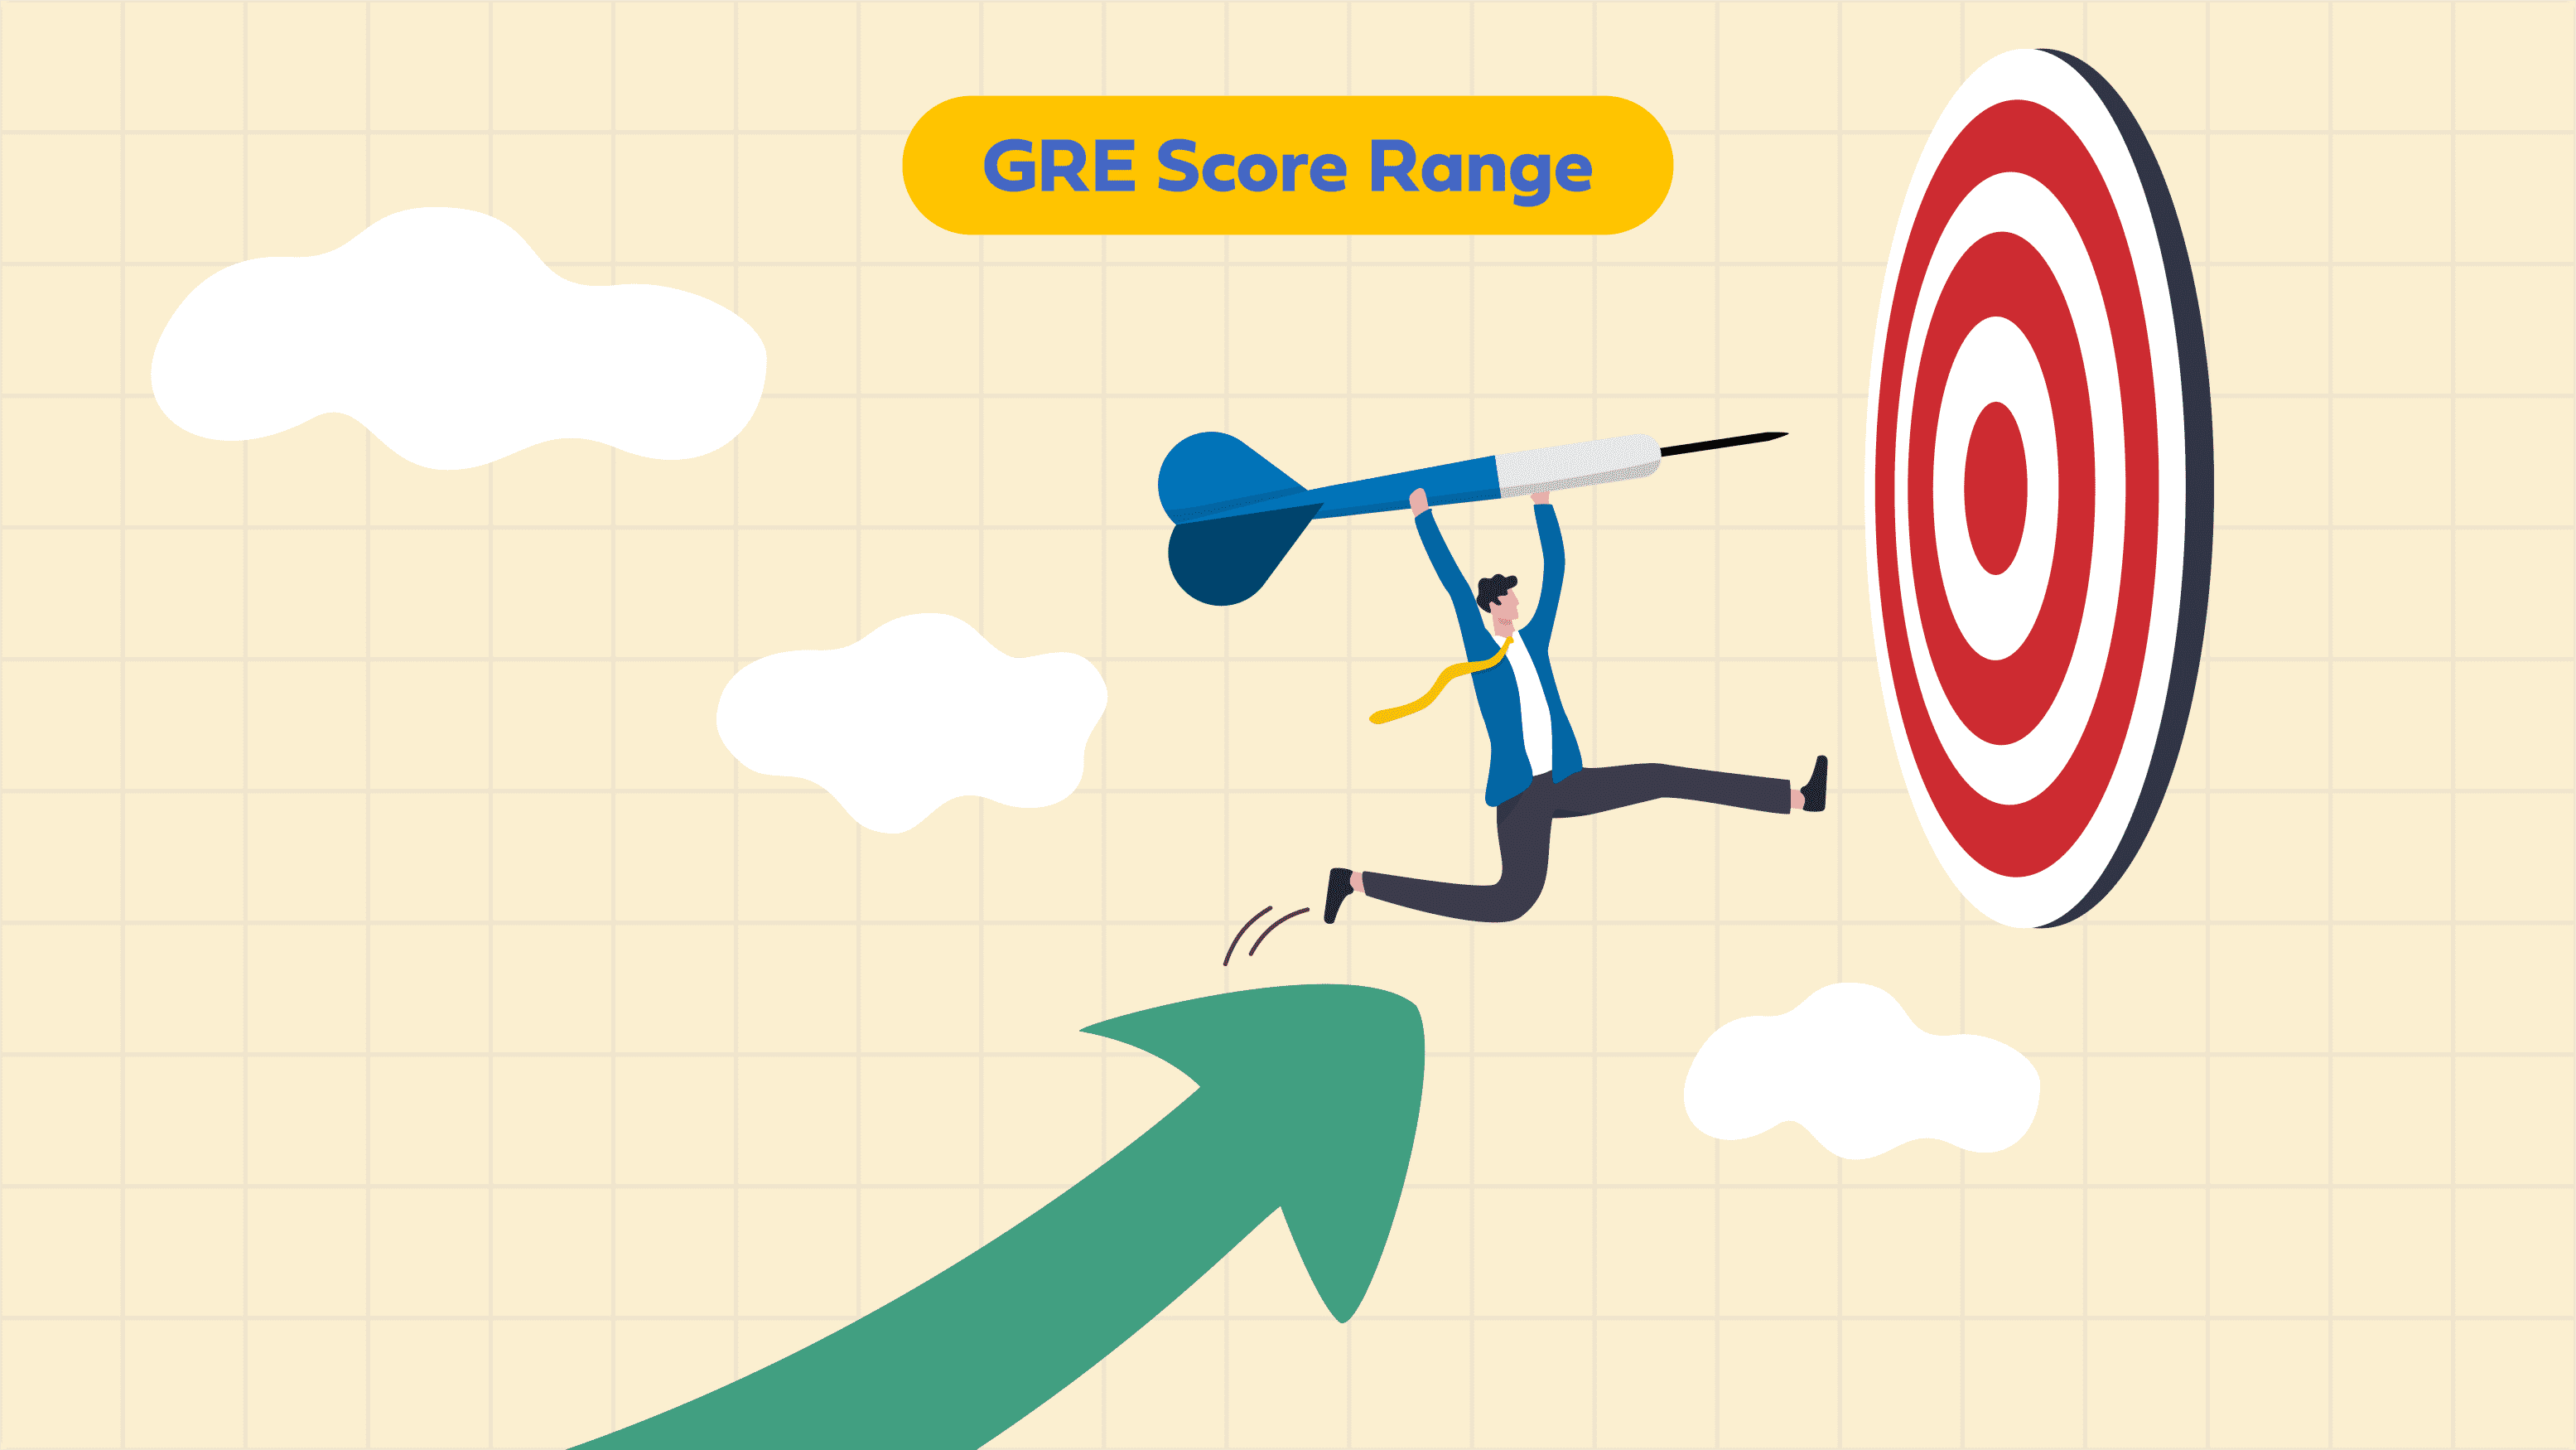 What is a good GRE score? Average GRE score and Range?